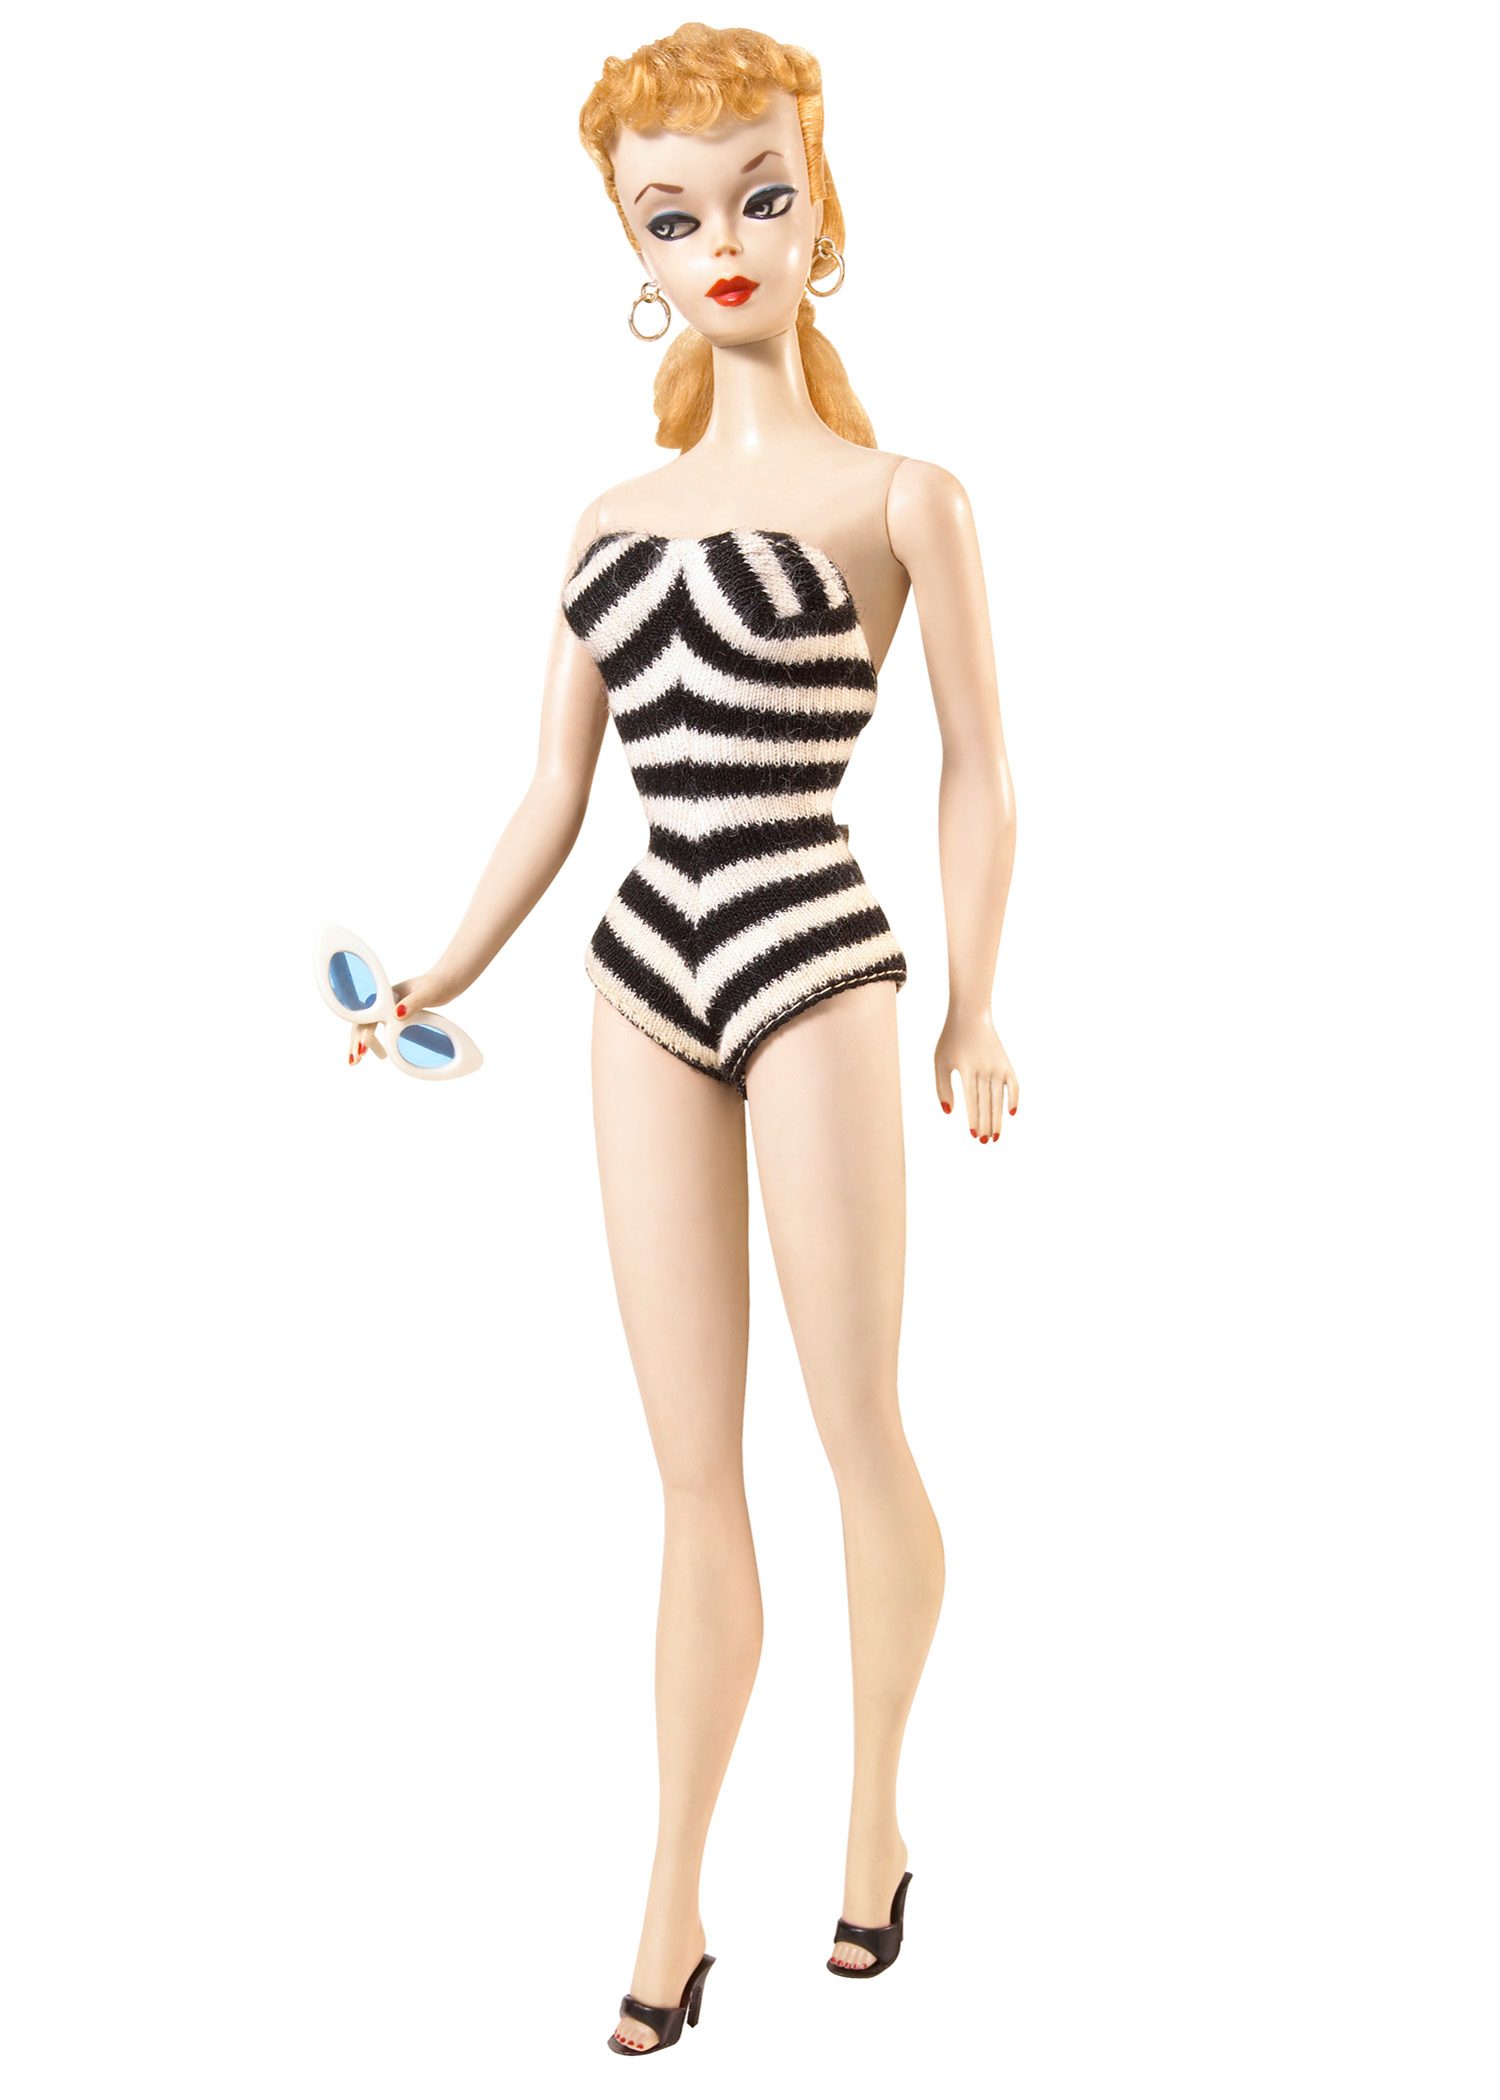 Vintage Barbie Dolls That Are Worth a Fortune | Reader's Digest